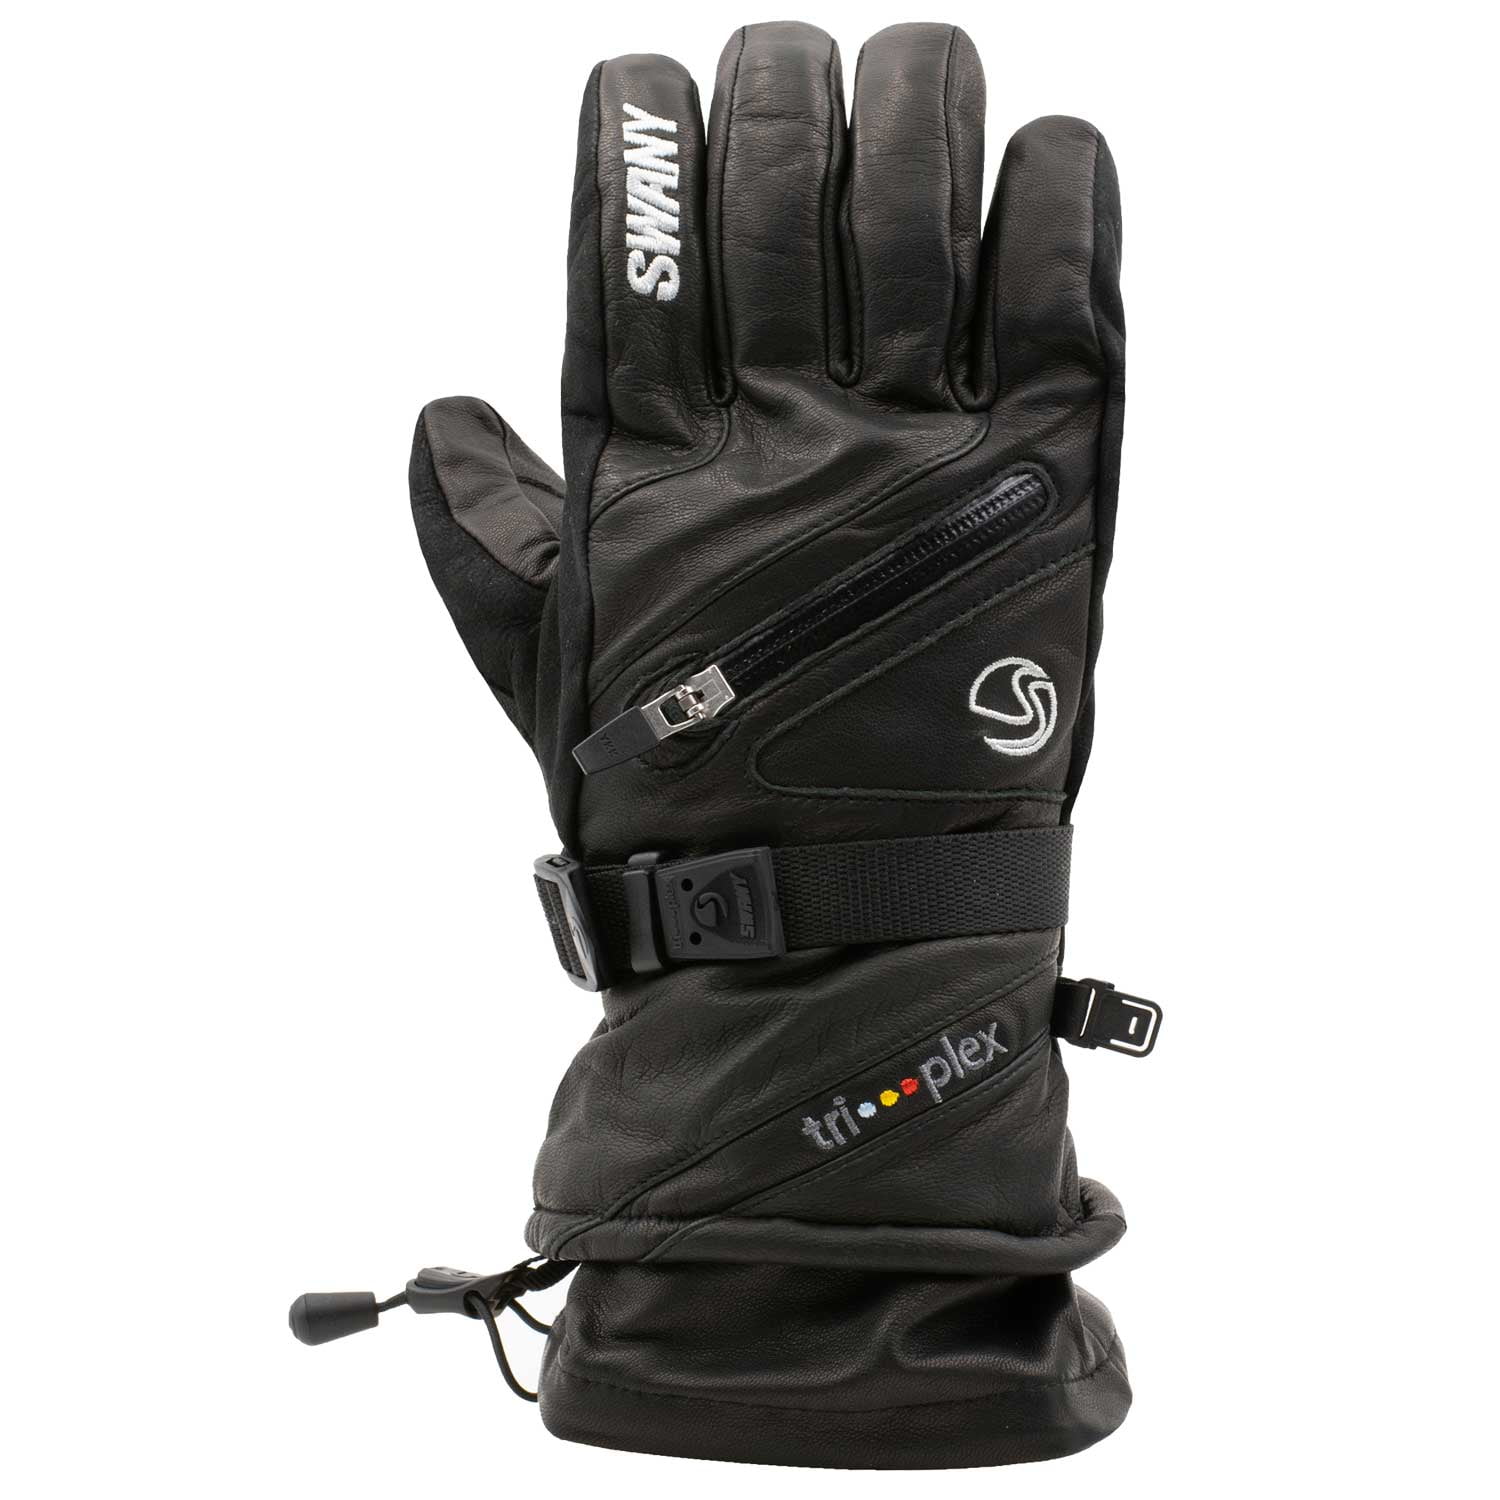 Ladies Swany Thinsulate Leather Driving Gloves,Black 